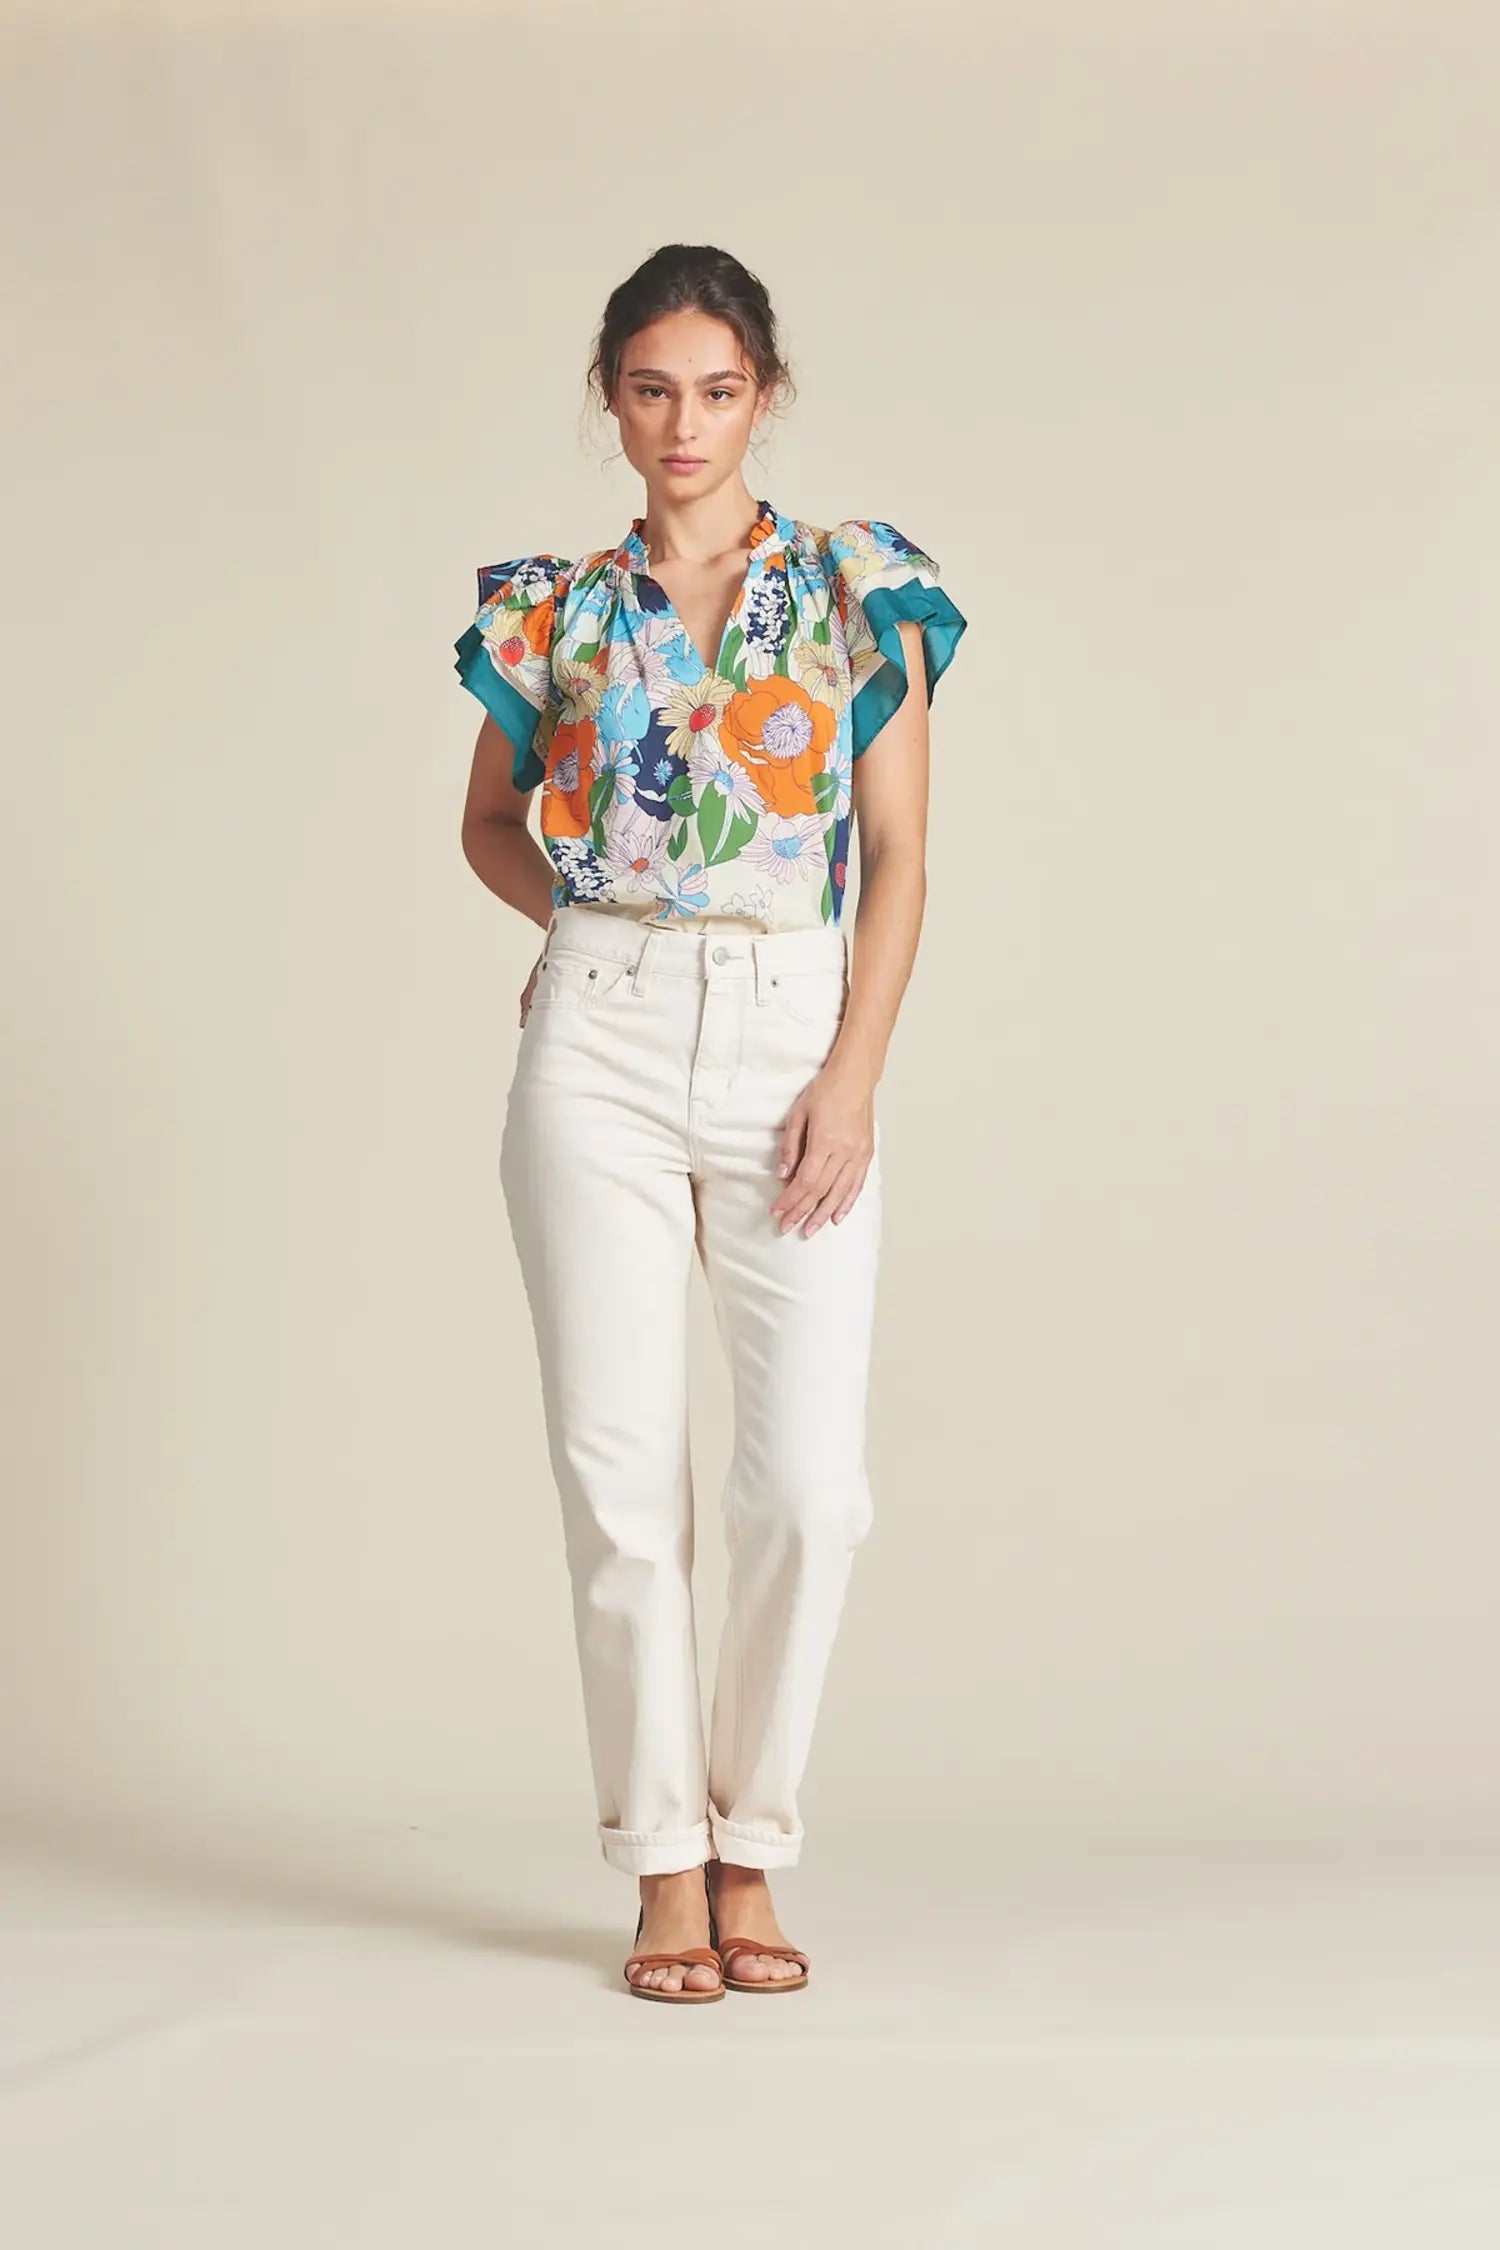 Birds of Paradis by Trovata Clover Blouse in Selva Floral